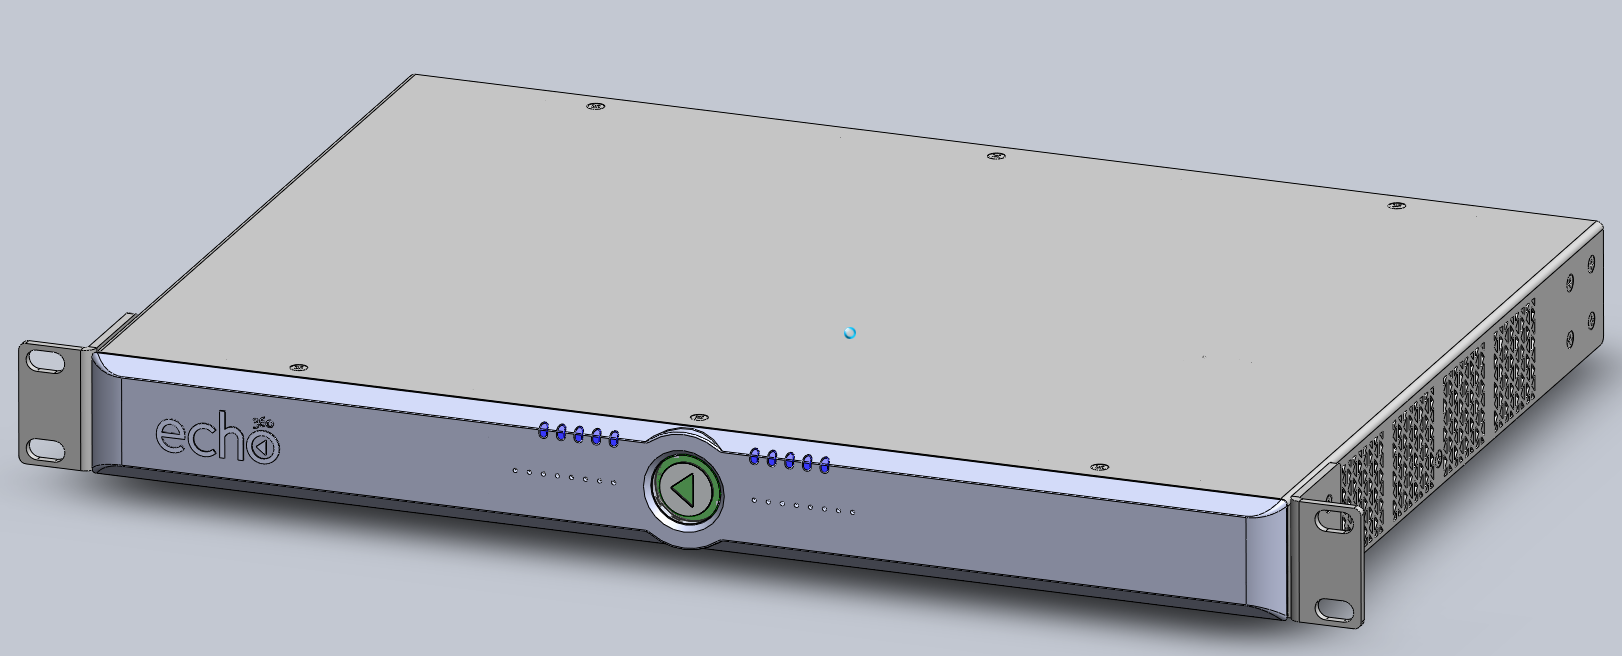 Graphic showing mounting brackets installed with fronts parallel to front of device